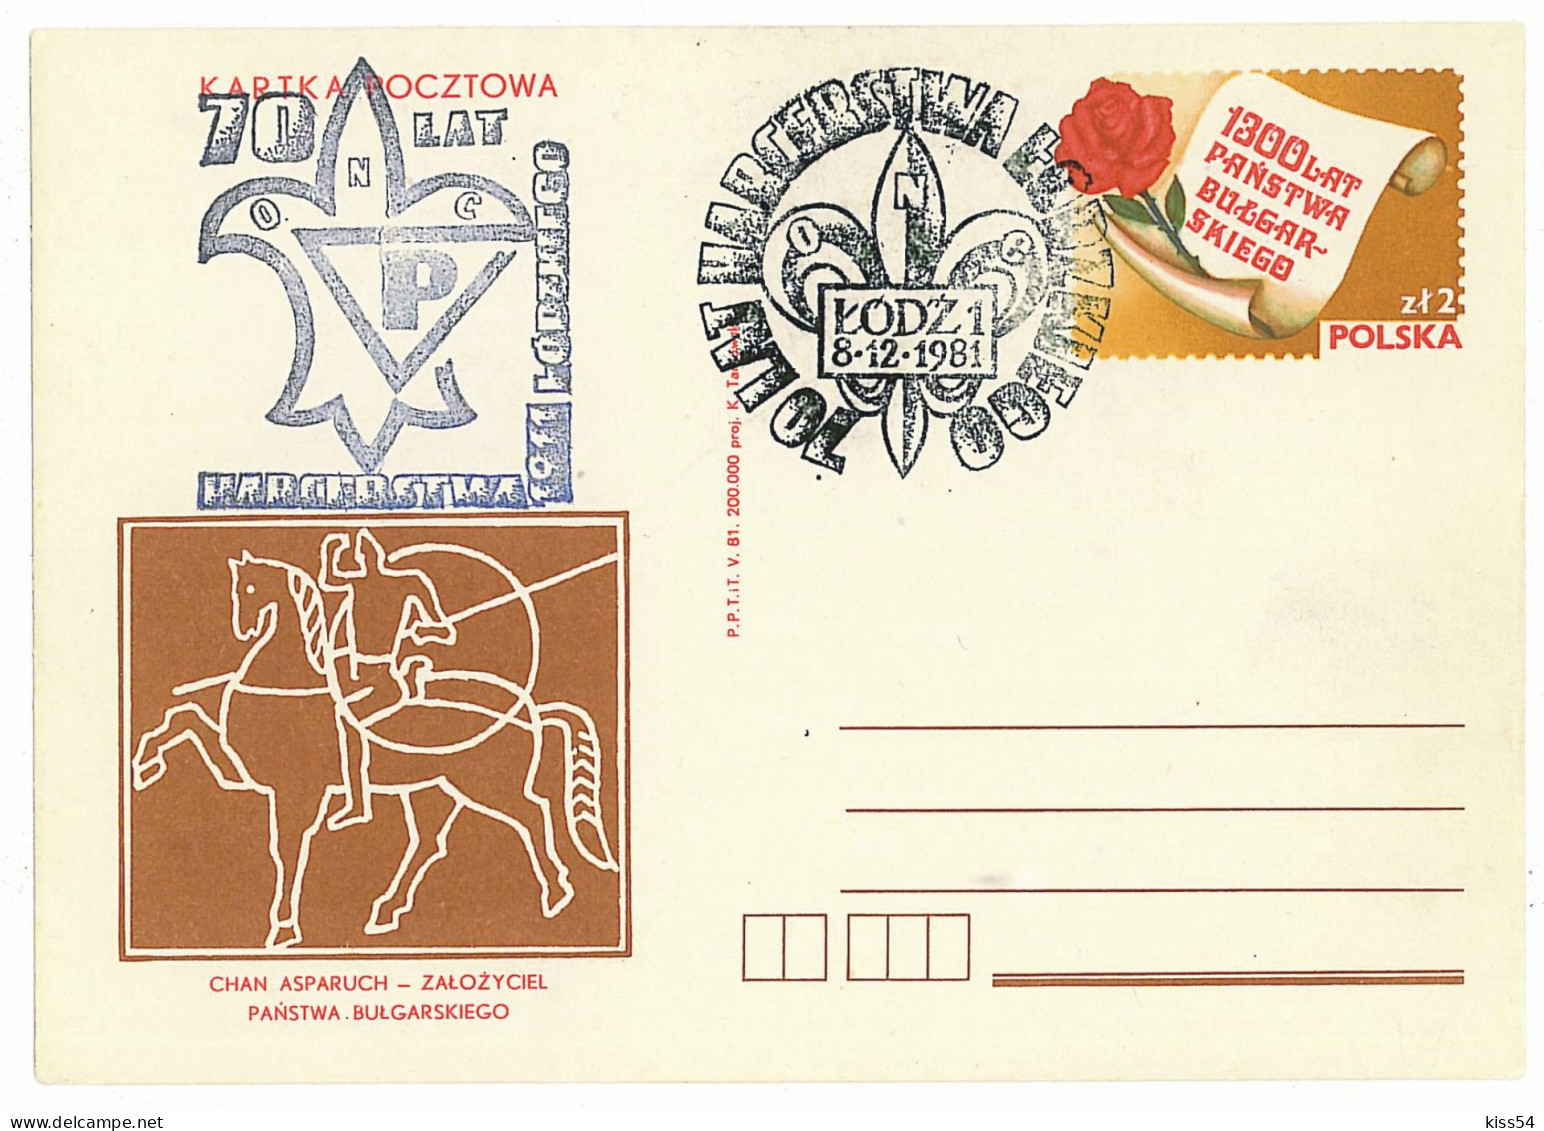 SC 25 - 908 Scout POLAND - Cover Stationery - Used - 1981 - Covers & Documents